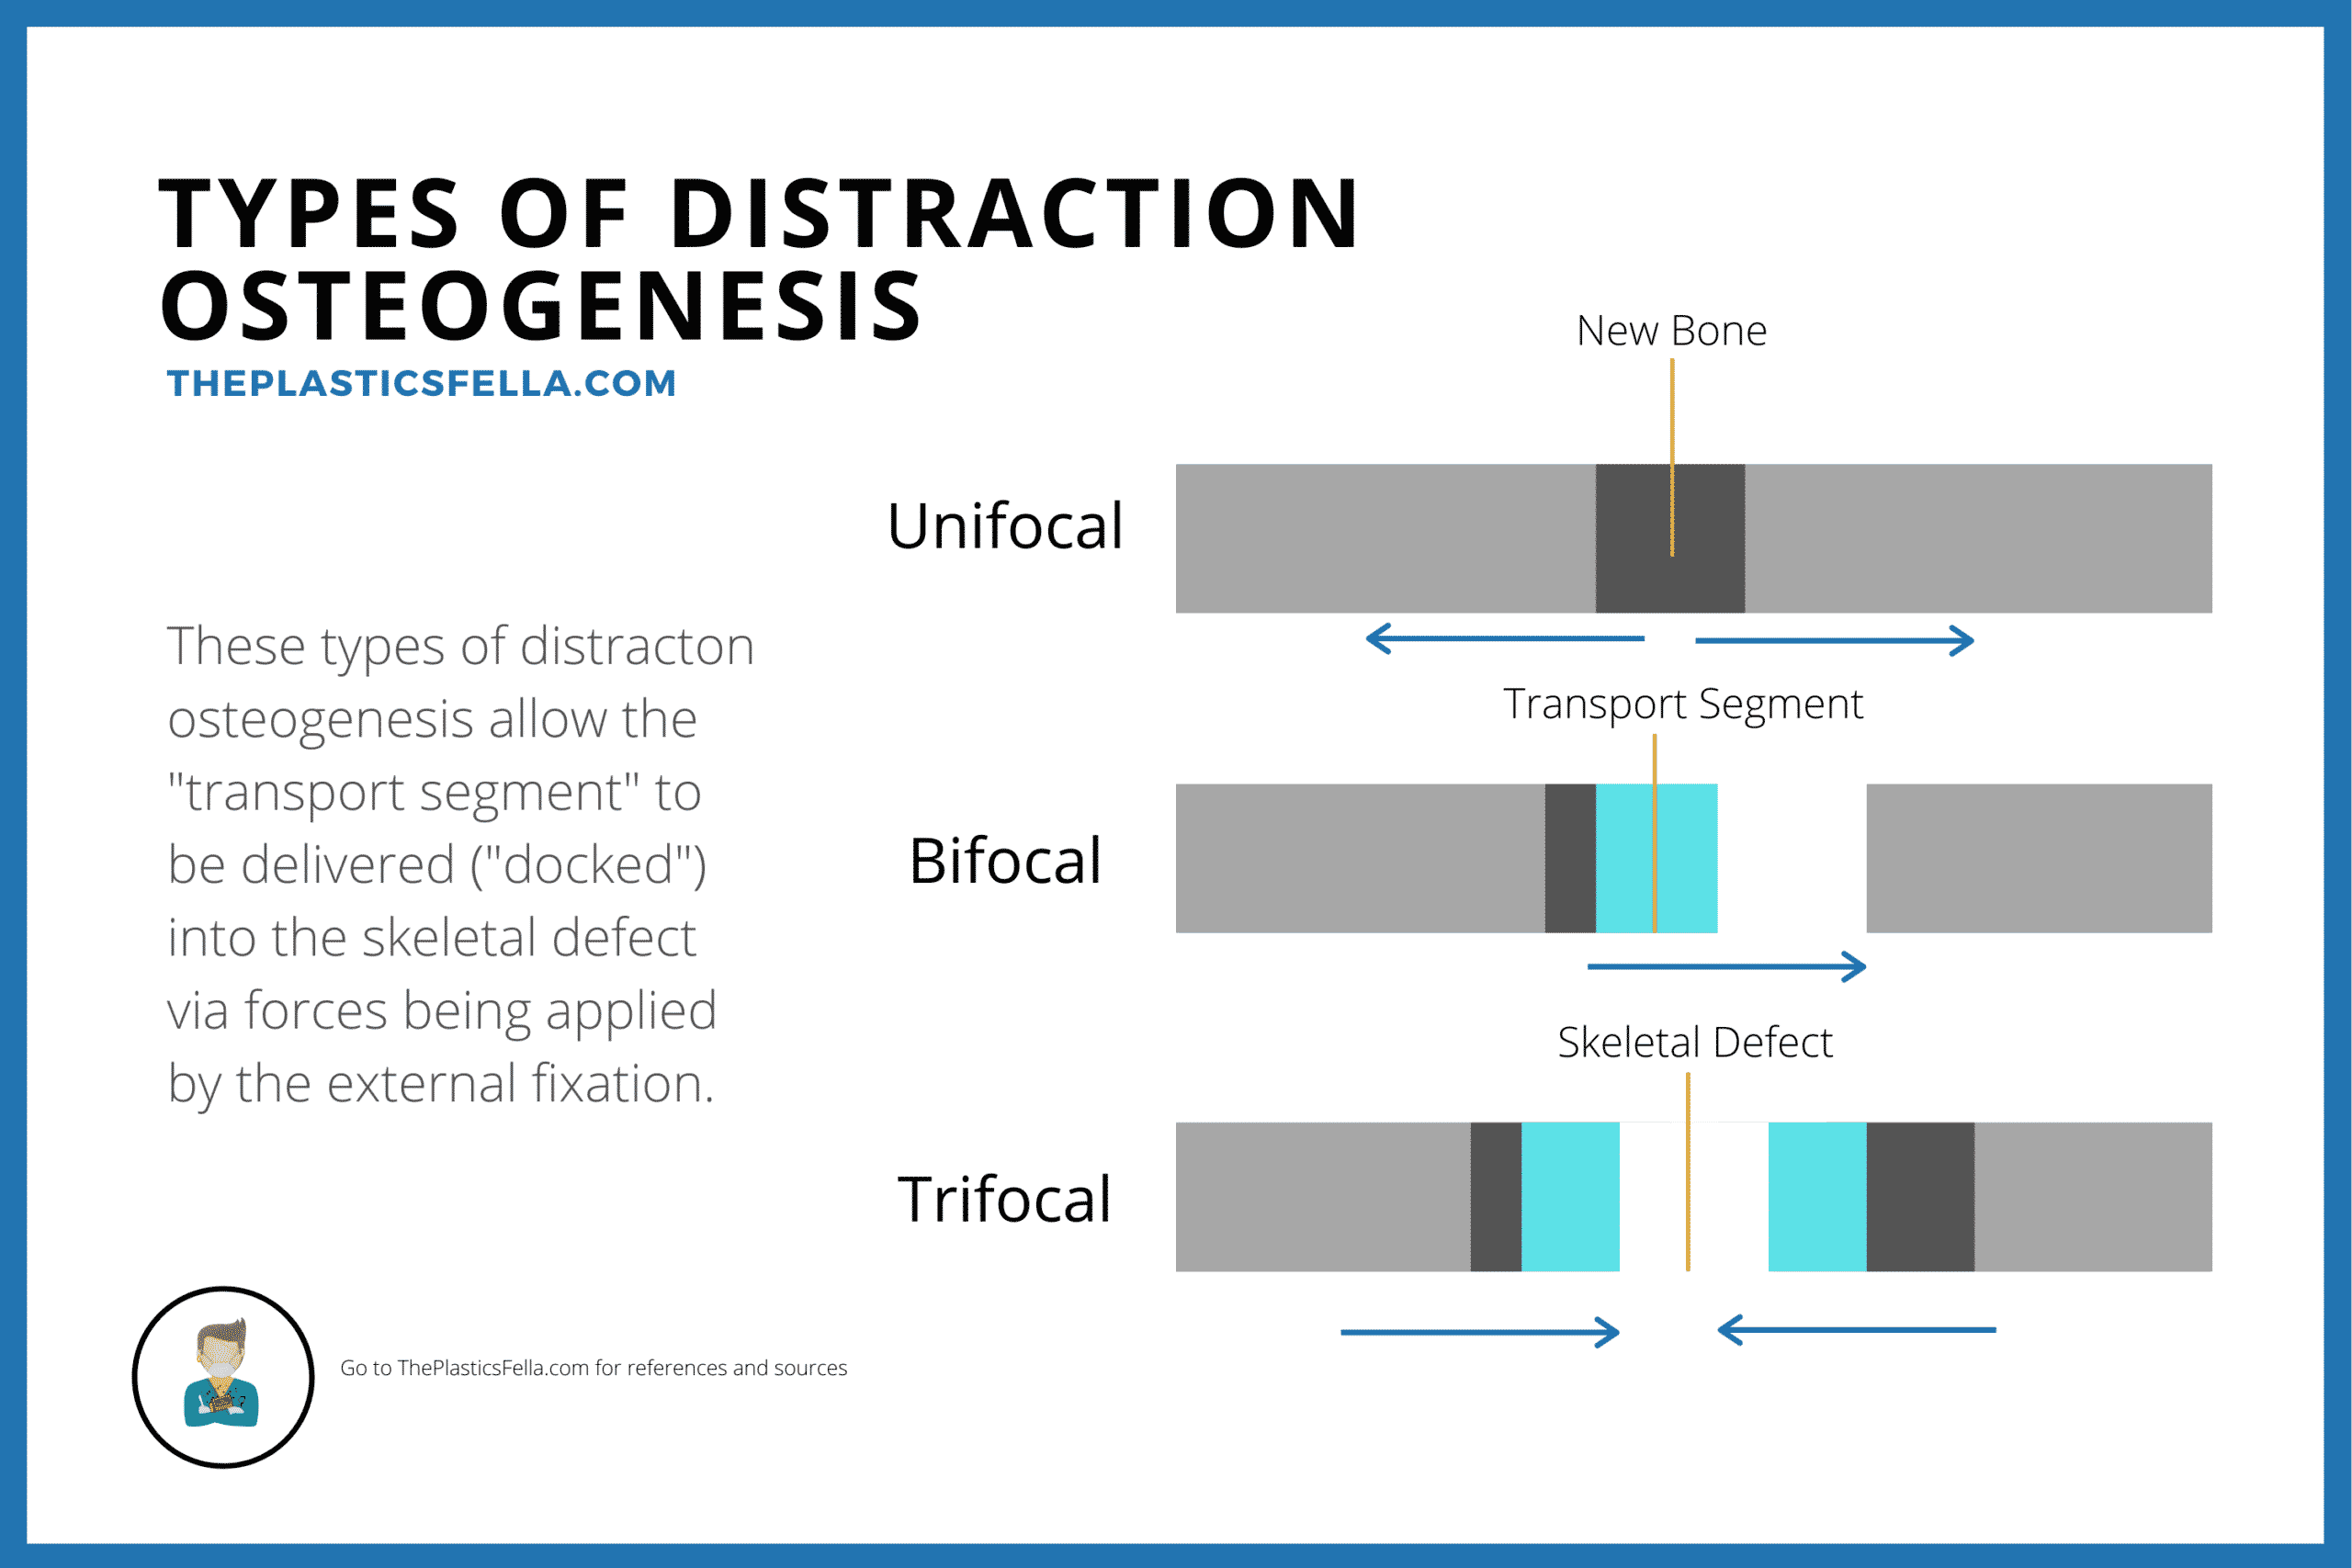 Types of Distraction Osteogenesis, Unifocal, Bifocal and Trifocal allow the transport segment to dock into the skeletal defect.